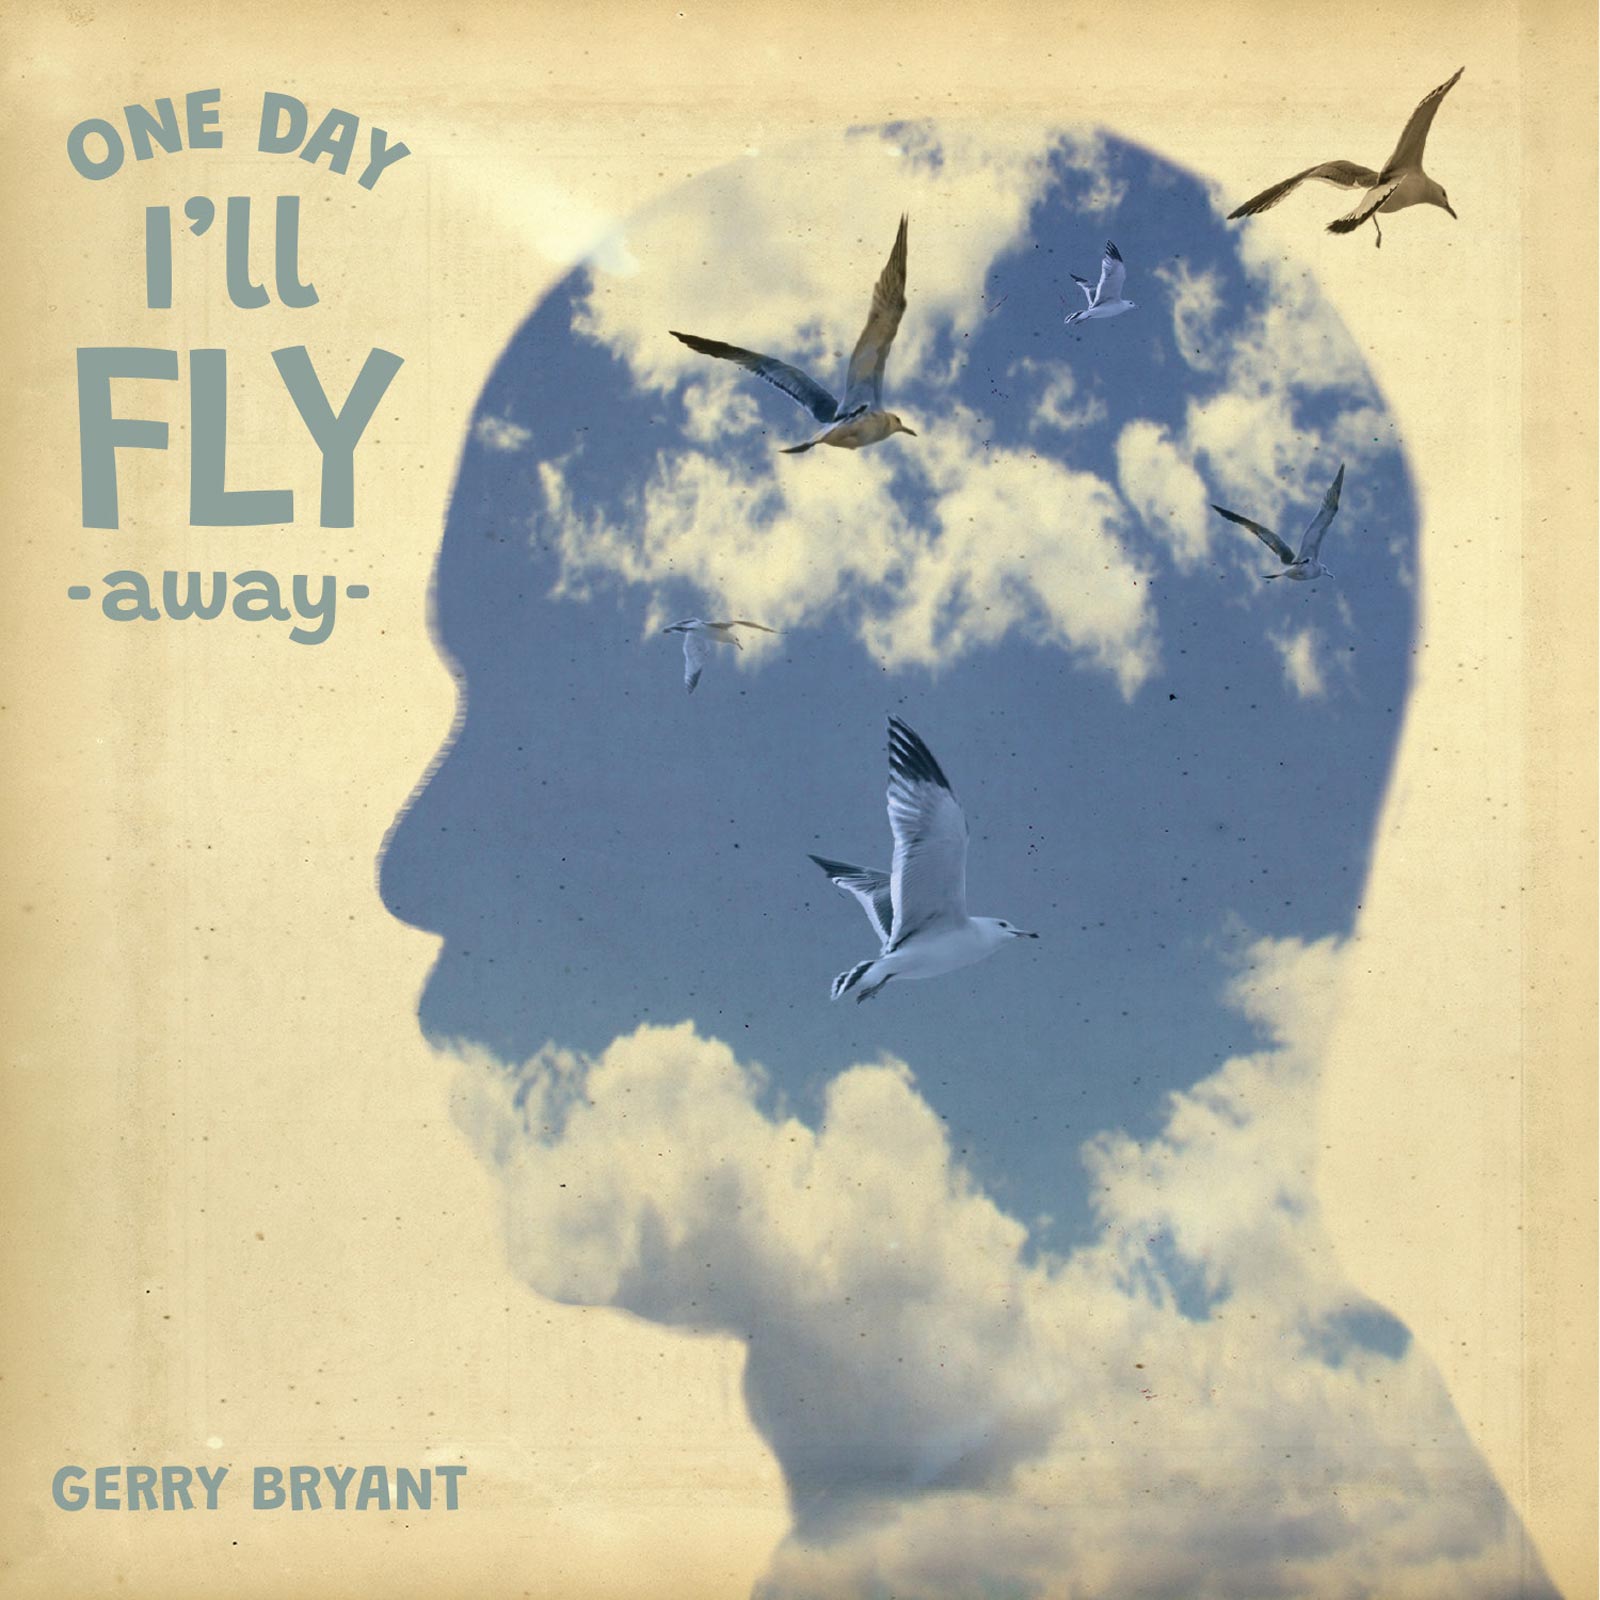 One Day I’ll Fly Away